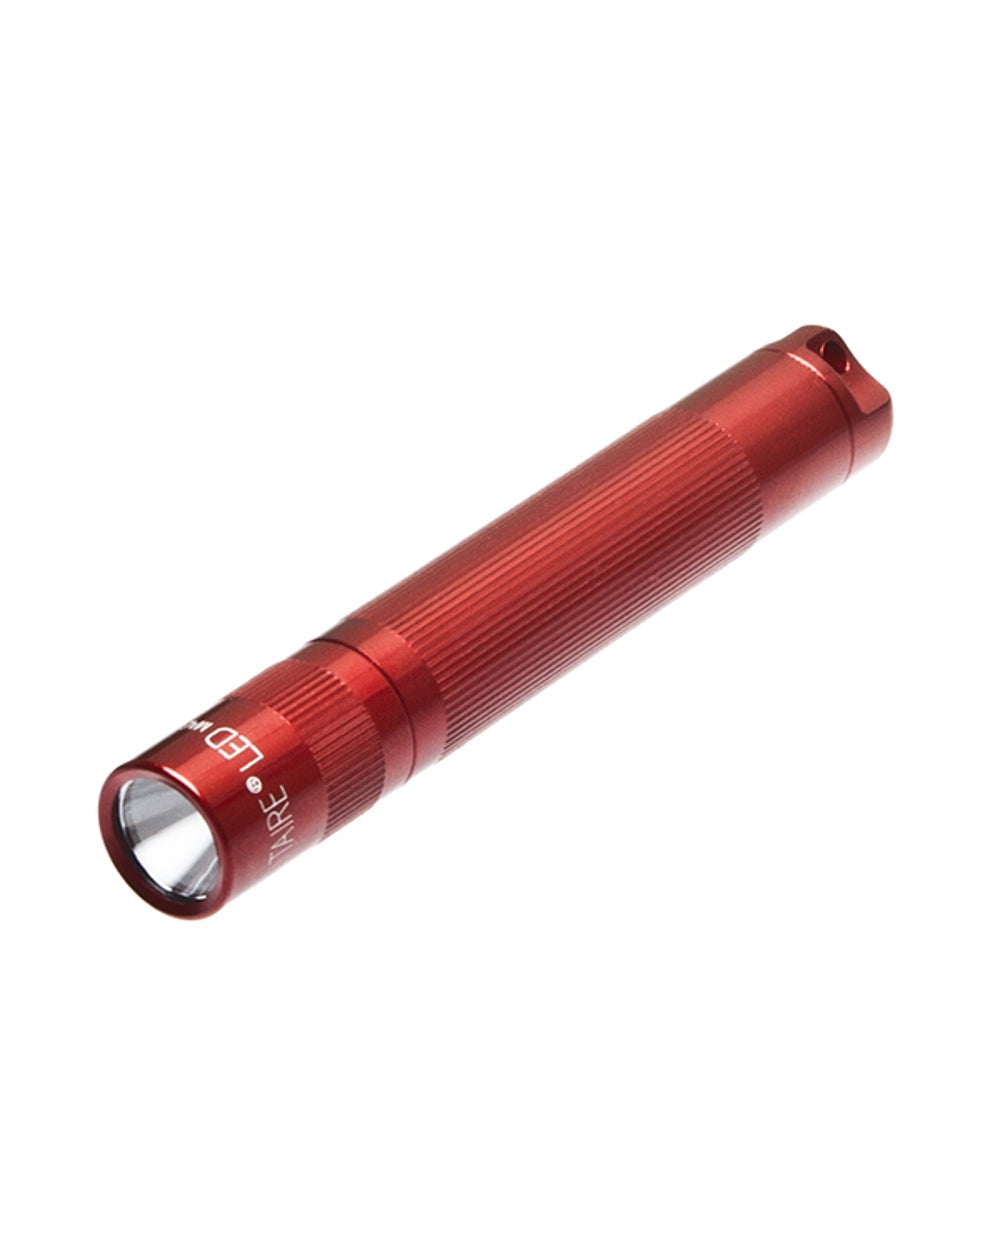 Maglite Solitaire 1-Cell AAA LED Torch in Red 